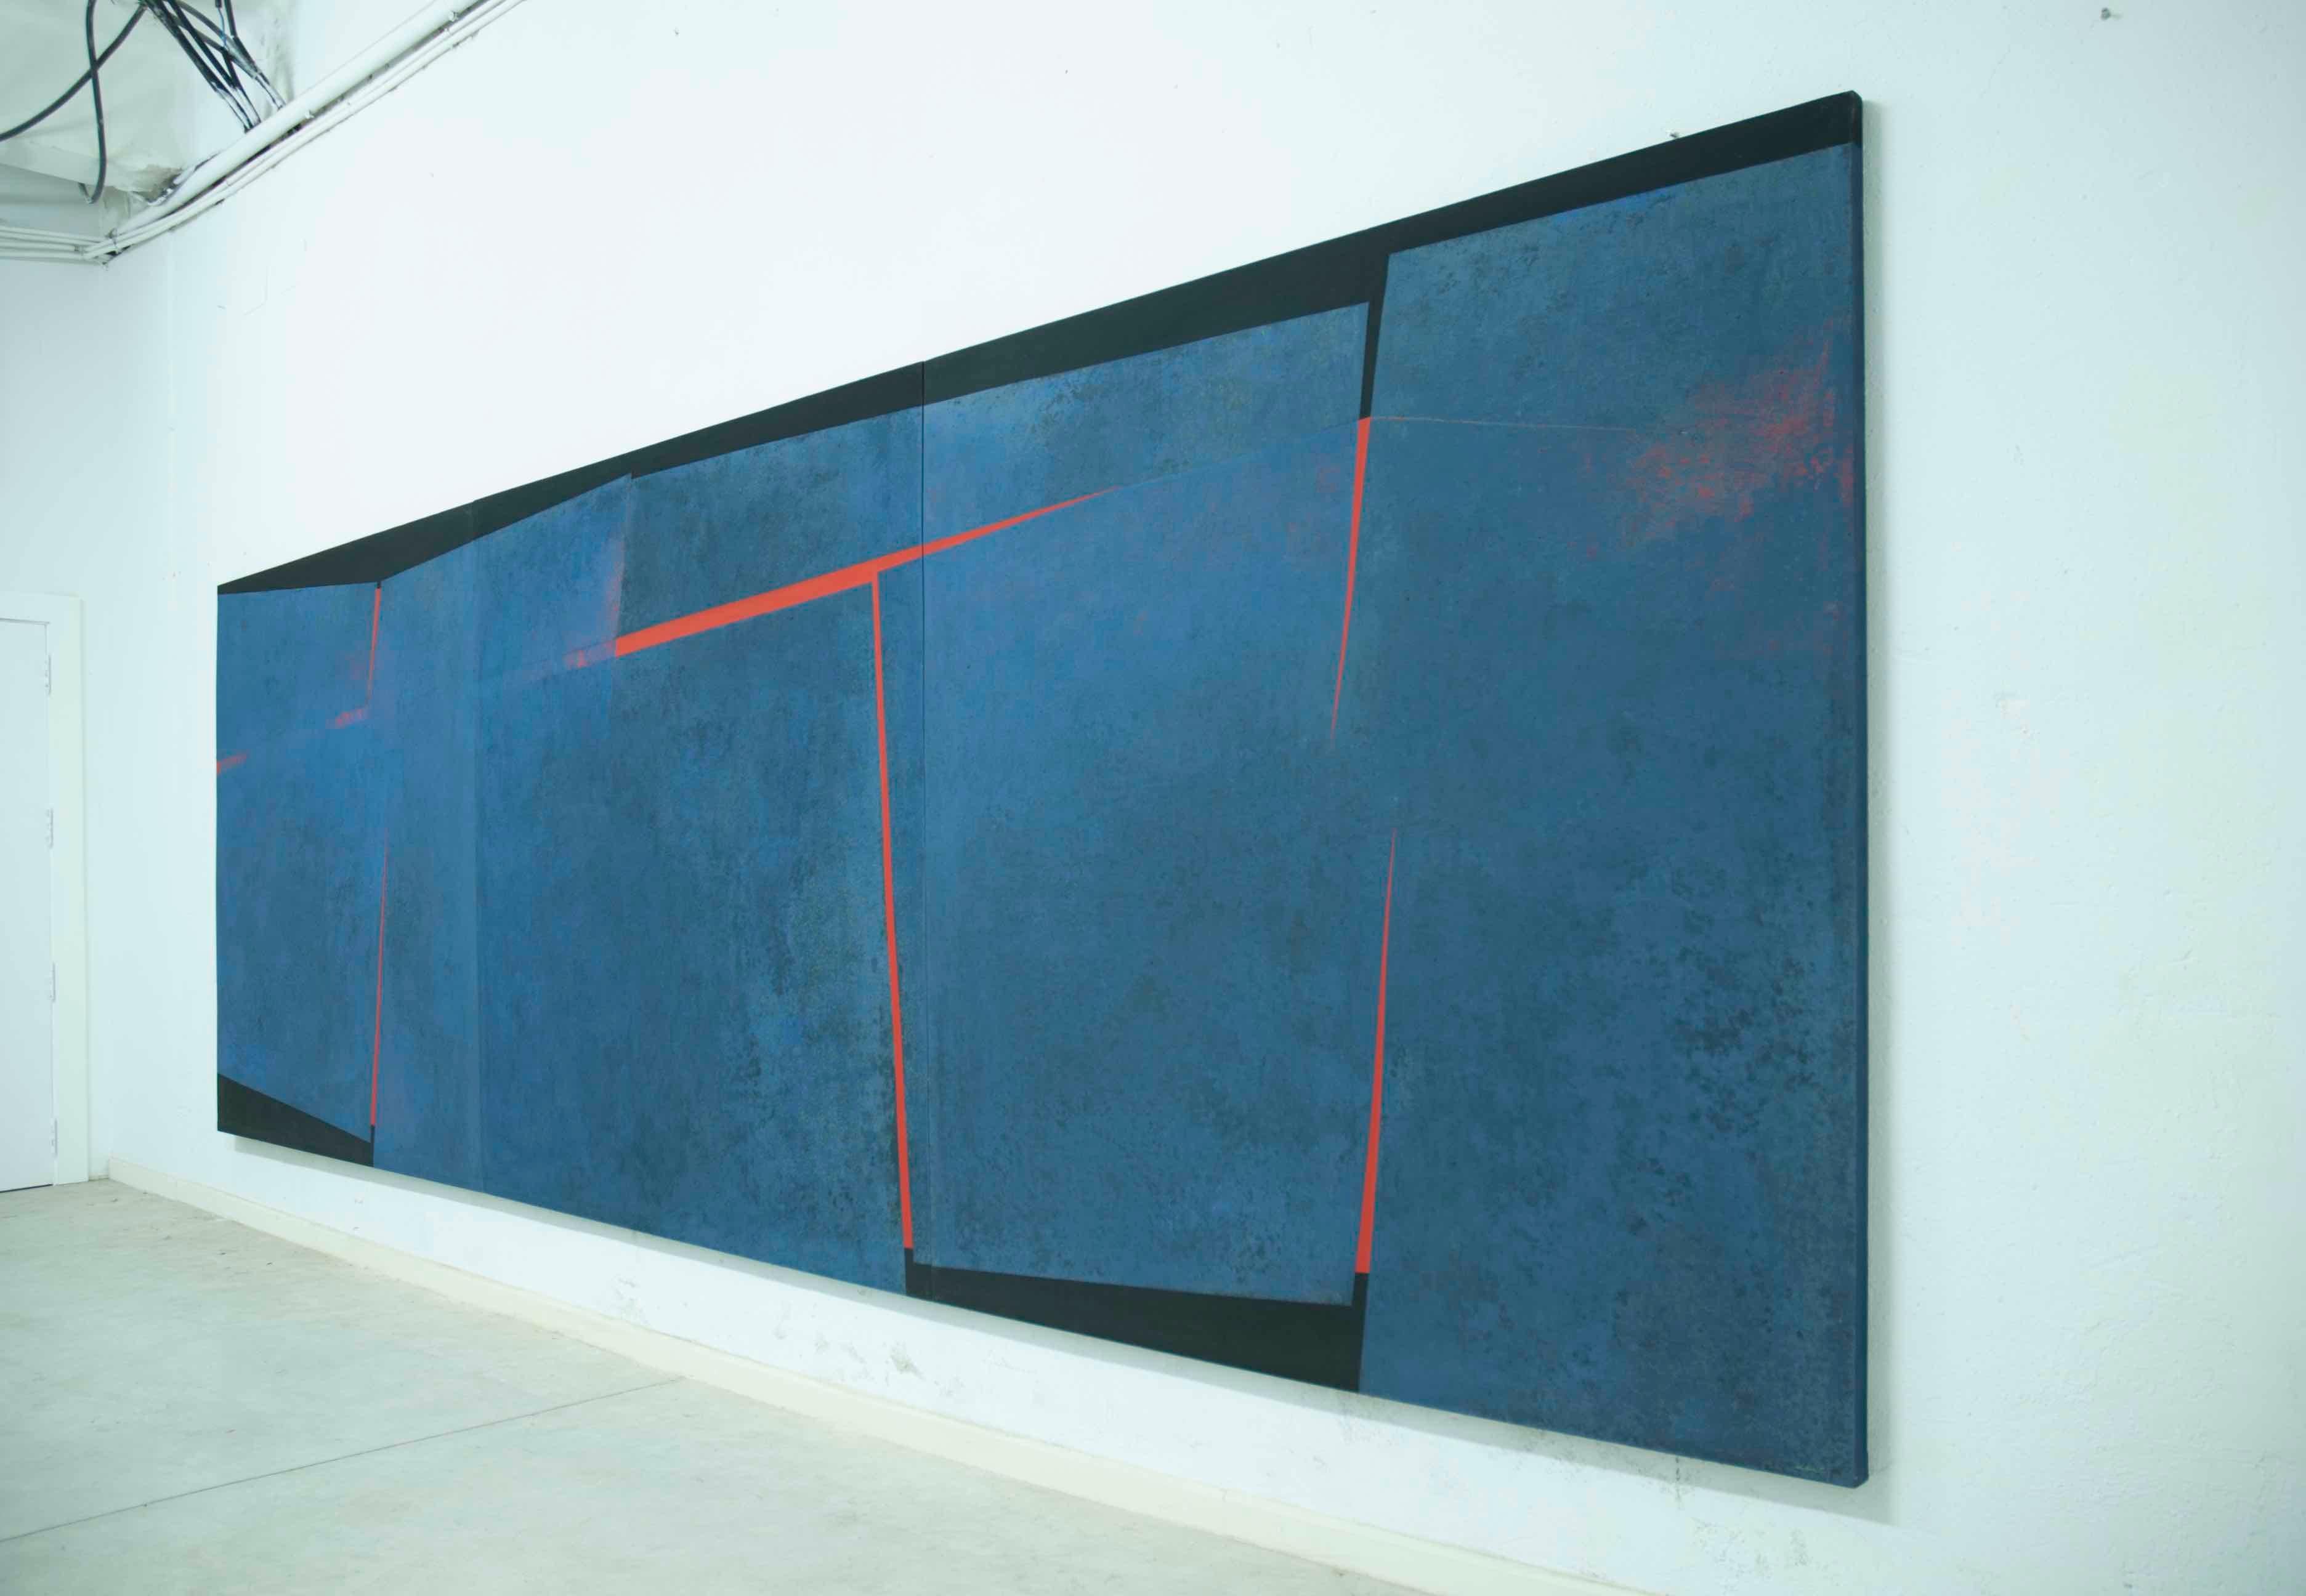 Hendiduras en la materia (Fissures in the matter), 2009, Mixed media on stretched canvas (triptych), 70 9/10 × 212 3/5 in; 180 × 540 cm

Spanish artist, Silvia Lerin came to London in 2014 to set up her practice, after receiving the Pollock-Krasner